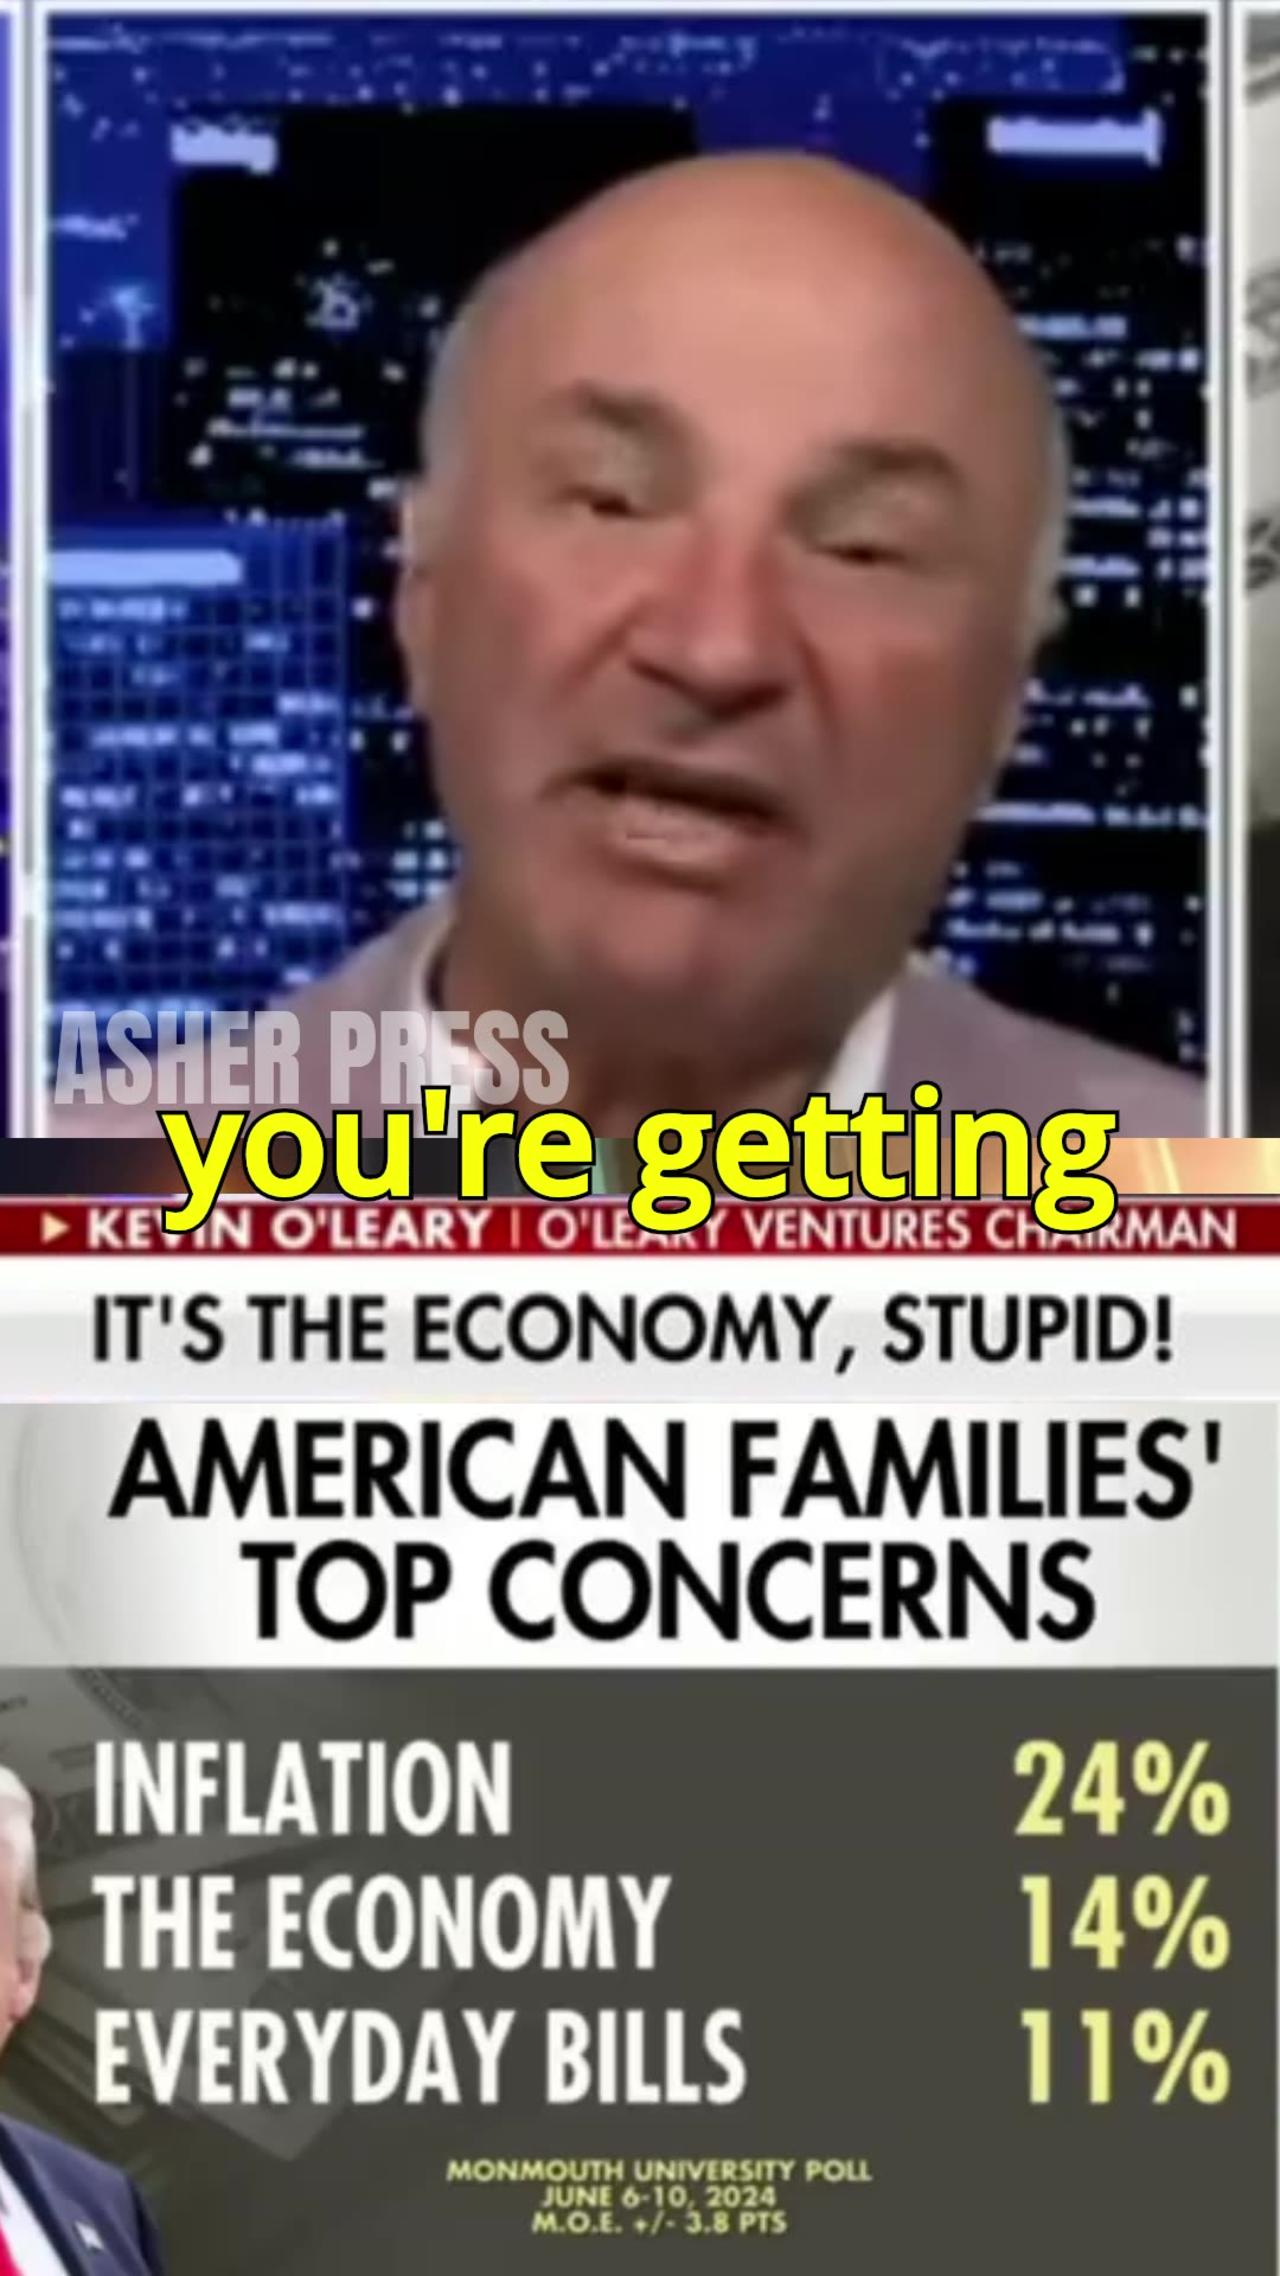 Kevin O’Leary Explains Why Biden Is Doomed - “Inflation always hurts the incumbent.”